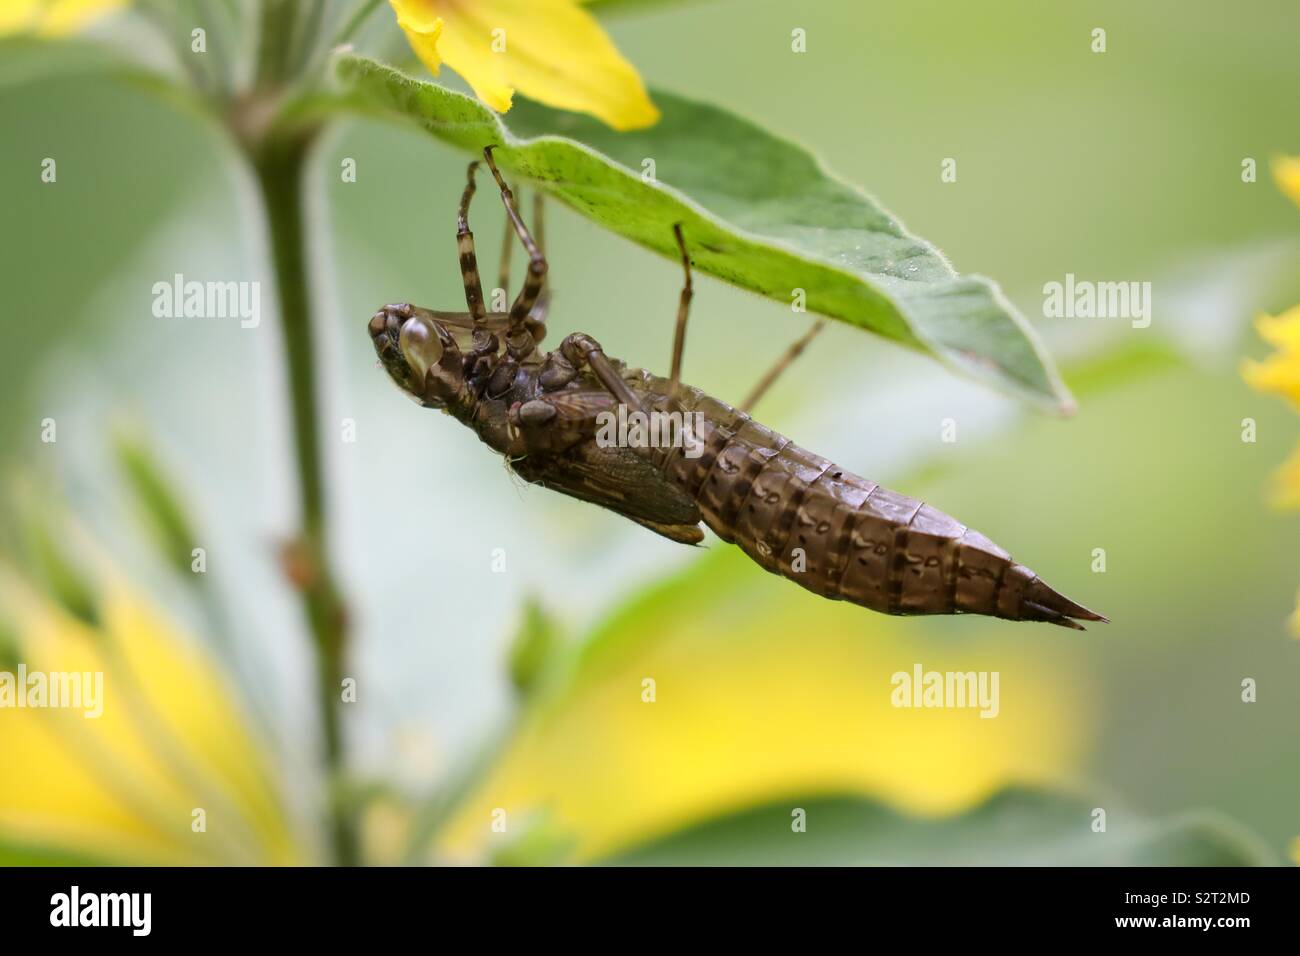 The Larvae of a Dragonfly Stock Photo